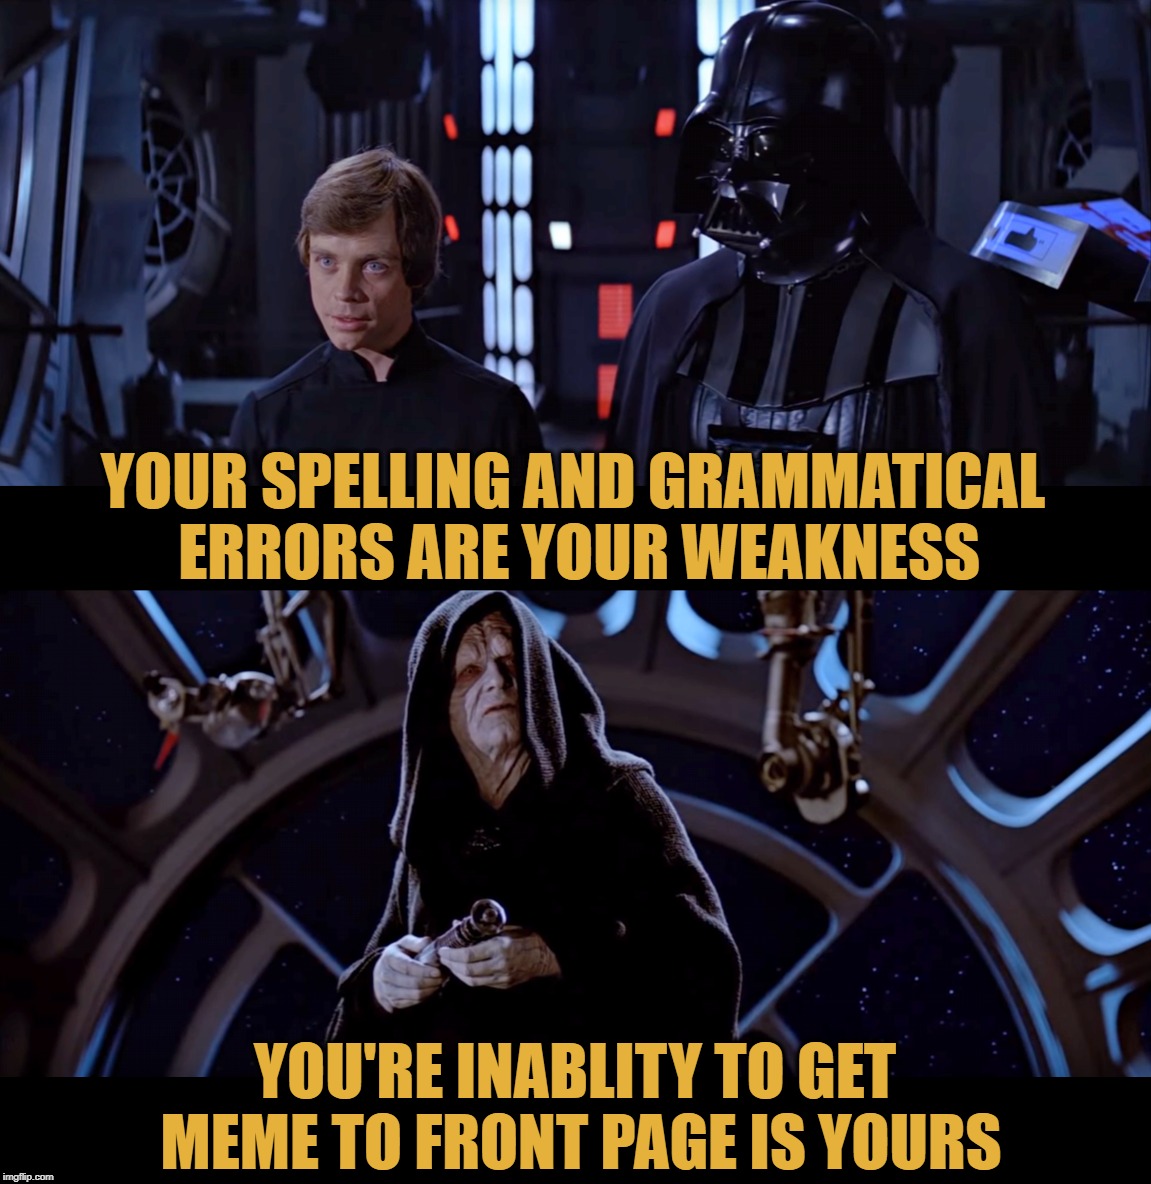 Luke vs Emperor | YOUR SPELLING AND GRAMMATICAL ERRORS ARE YOUR WEAKNESS; YOU'RE INABLITY TO GET MEME TO FRONT PAGE IS YOURS | image tagged in memes,luke vs emperor,luke skywalker,star wars emperor,star wars,bad grammar and spelling memes | made w/ Imgflip meme maker